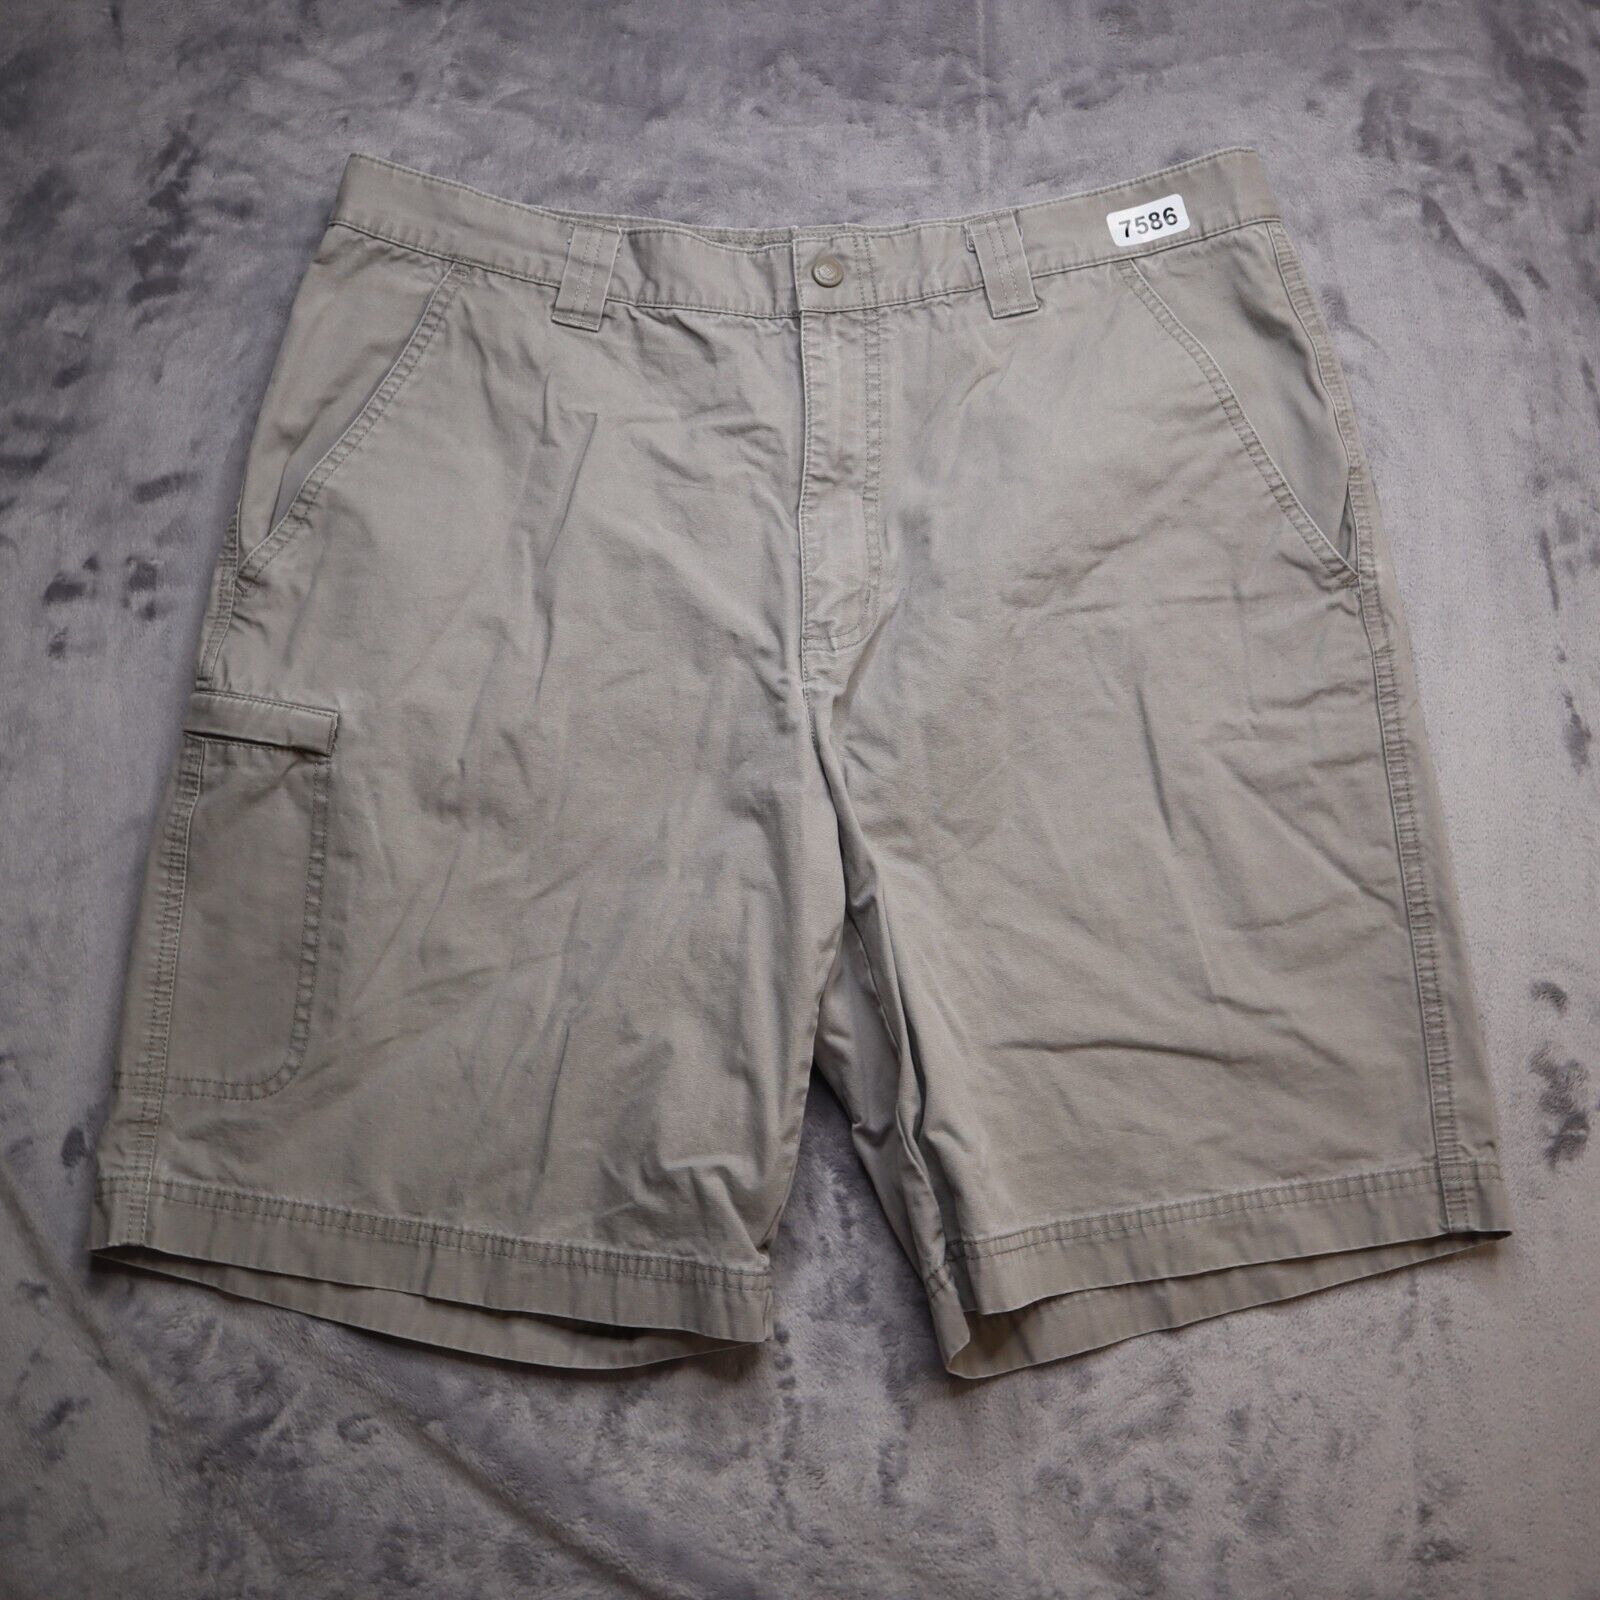 Primary image for Columbia Shorts Adult 36 Khaki Lightweight Athletic Cargo Fish Hike Casual